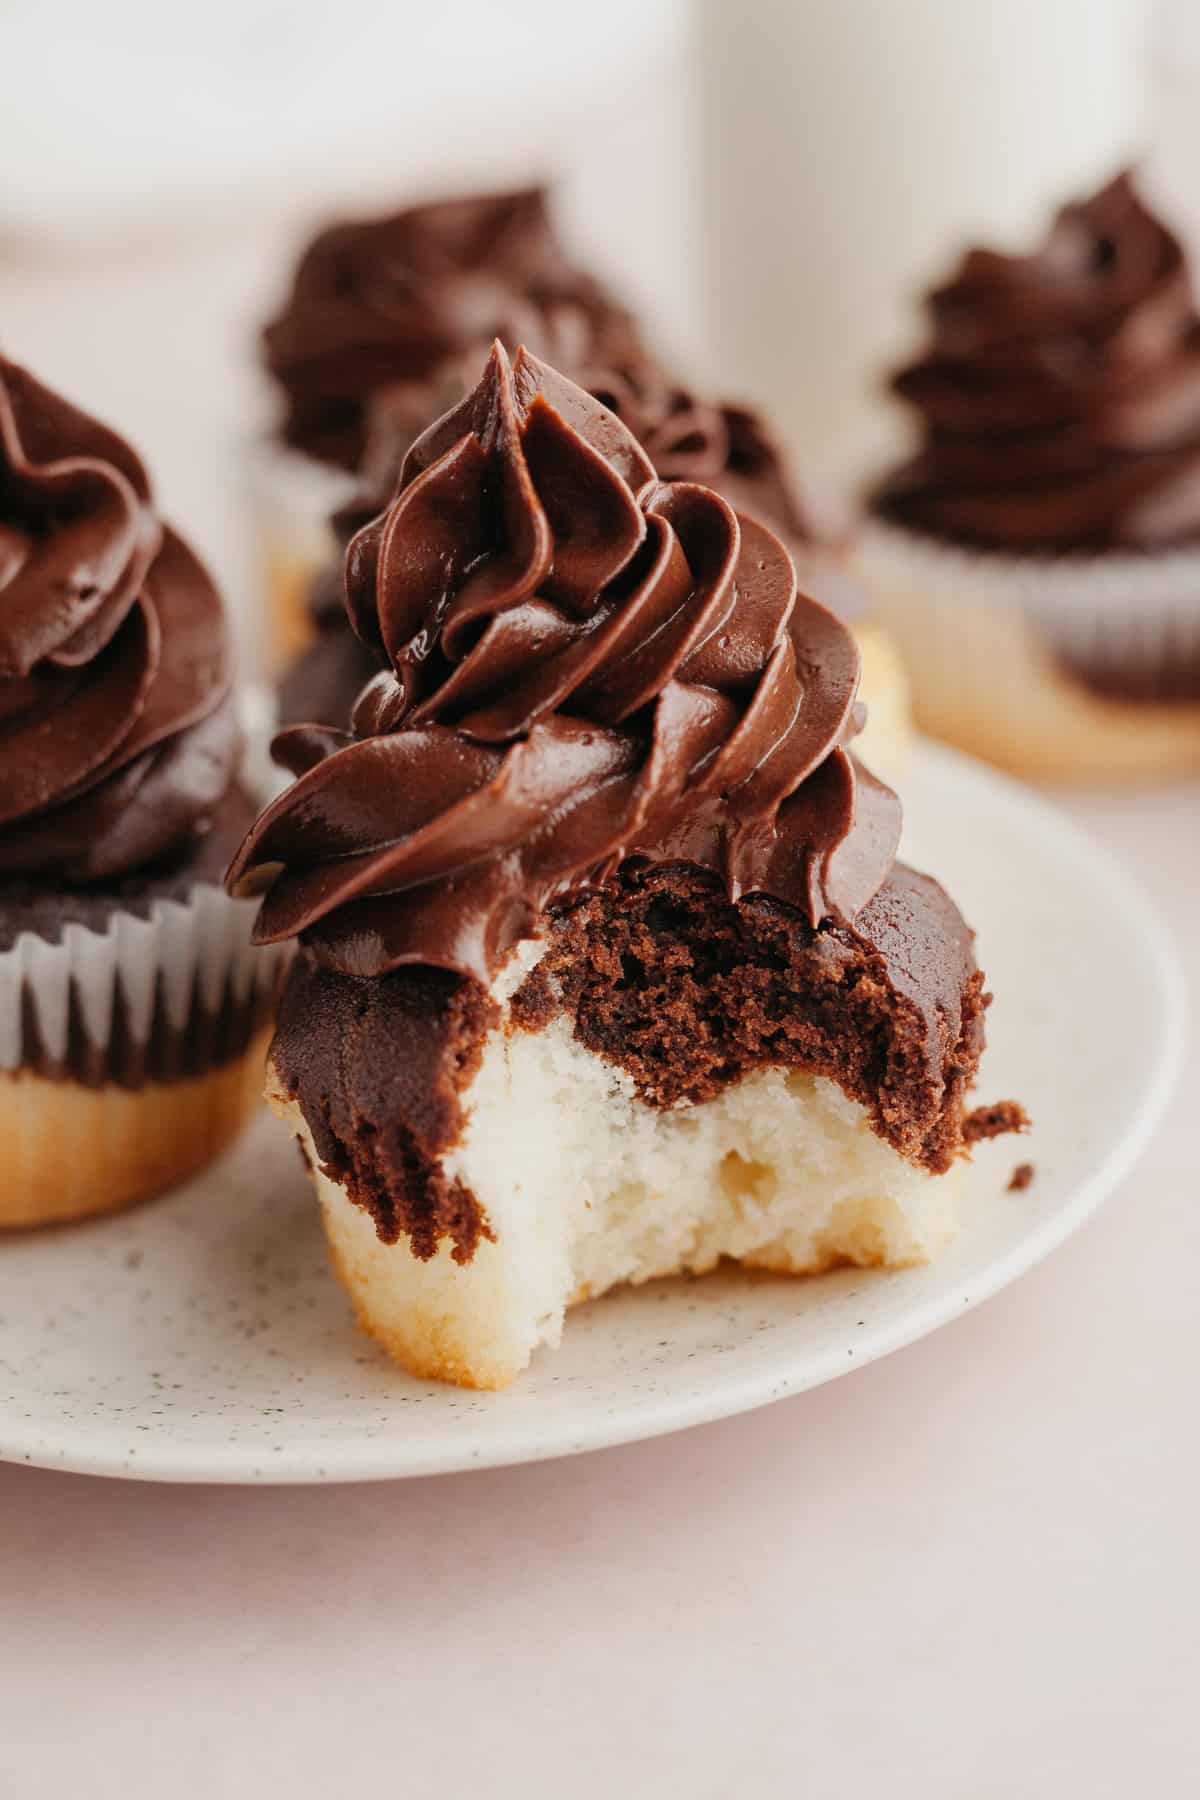 A close up of a marbled cupcake with chocolate frosting, a bite has been taken out of the cupcake.